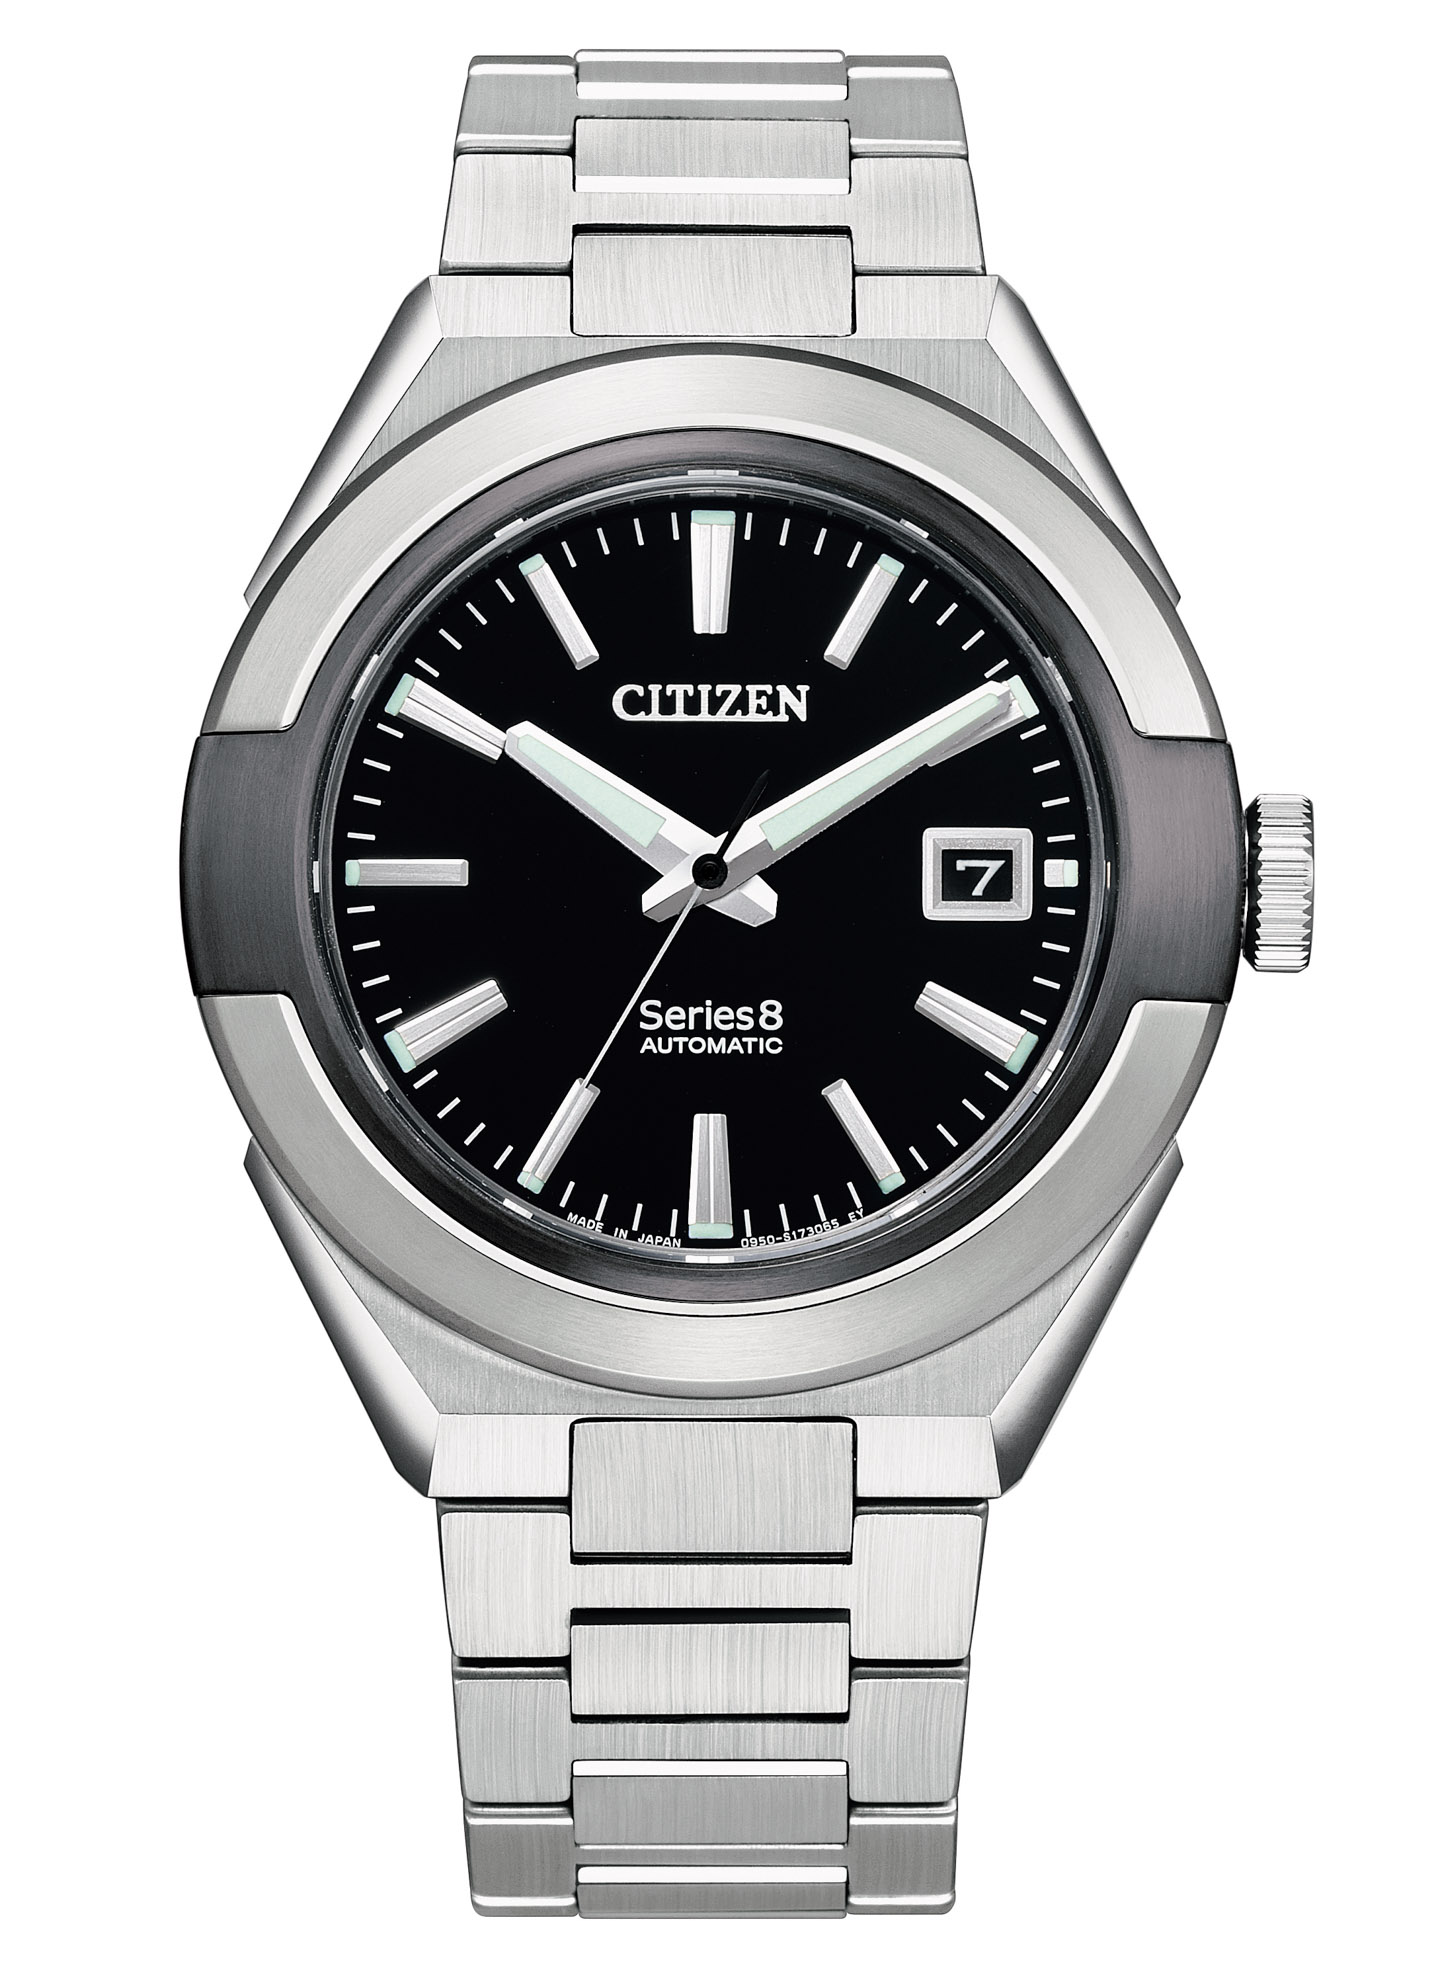 concern Incredible somewhat Citizen Debuts New Series 8 Automatic Watch Collection | aBlogtoWatch